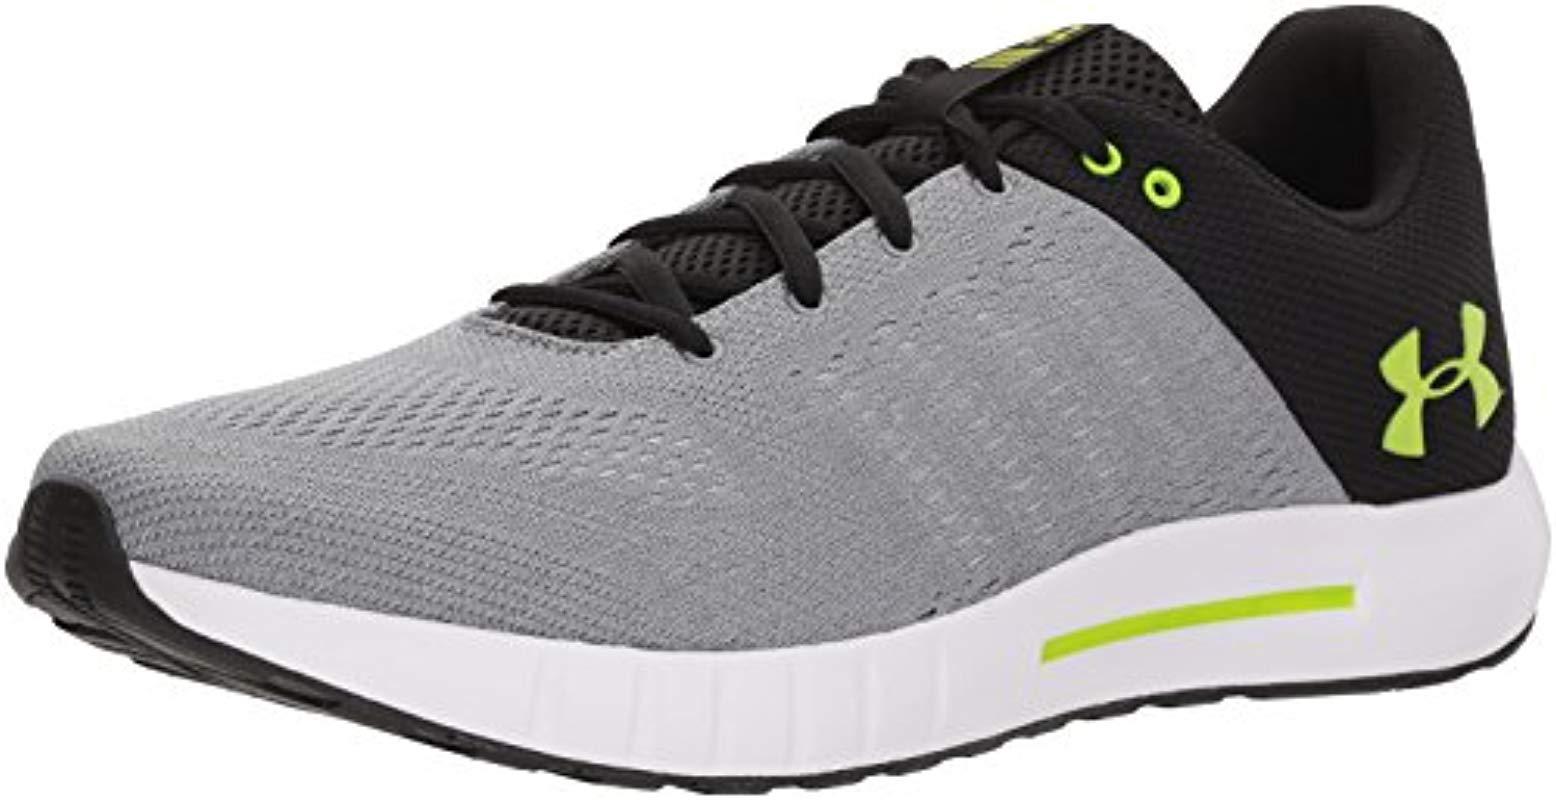 Under Armour Ua Micro G Pursuit Running Shoes in Gray for Men - Lyst